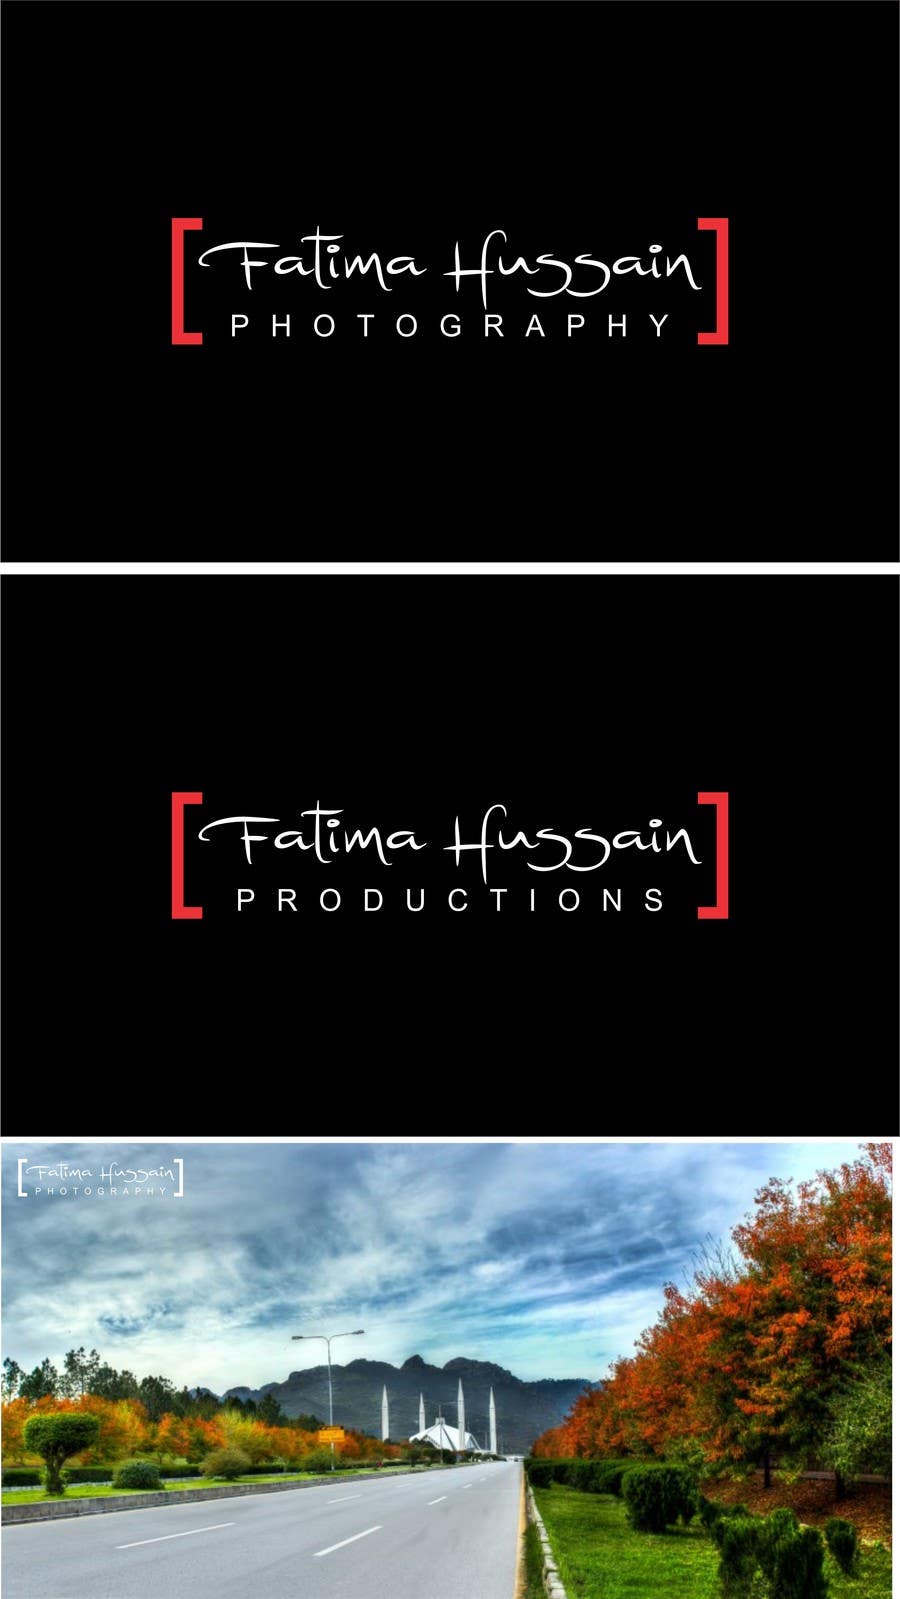 Proposition n°51 du concours                                                 Design a Logo for Fatima Hussain Photography/Productions
                                            